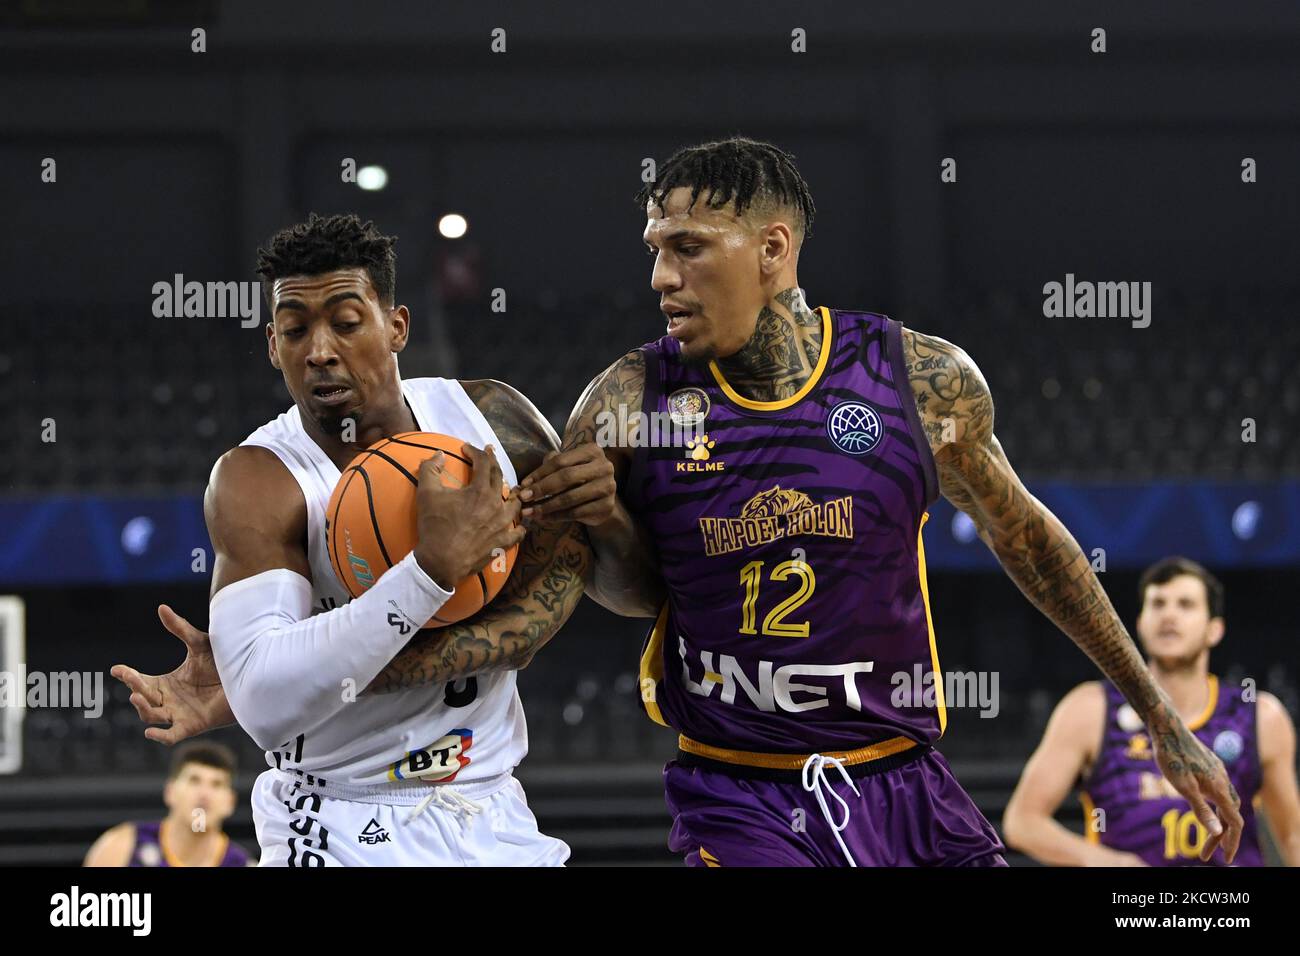 Karel Guzman (L) and Michale Kyser (R) in action during the game U-BT Cluj-Napoca v Hapoel U-NET Holon in group G of Basketball Champions League, disputed in BT Arena, Cluj-Napoca, 17 November 2021 (Photo by Flaviu Buboi/NurPhoto) Stock Photo